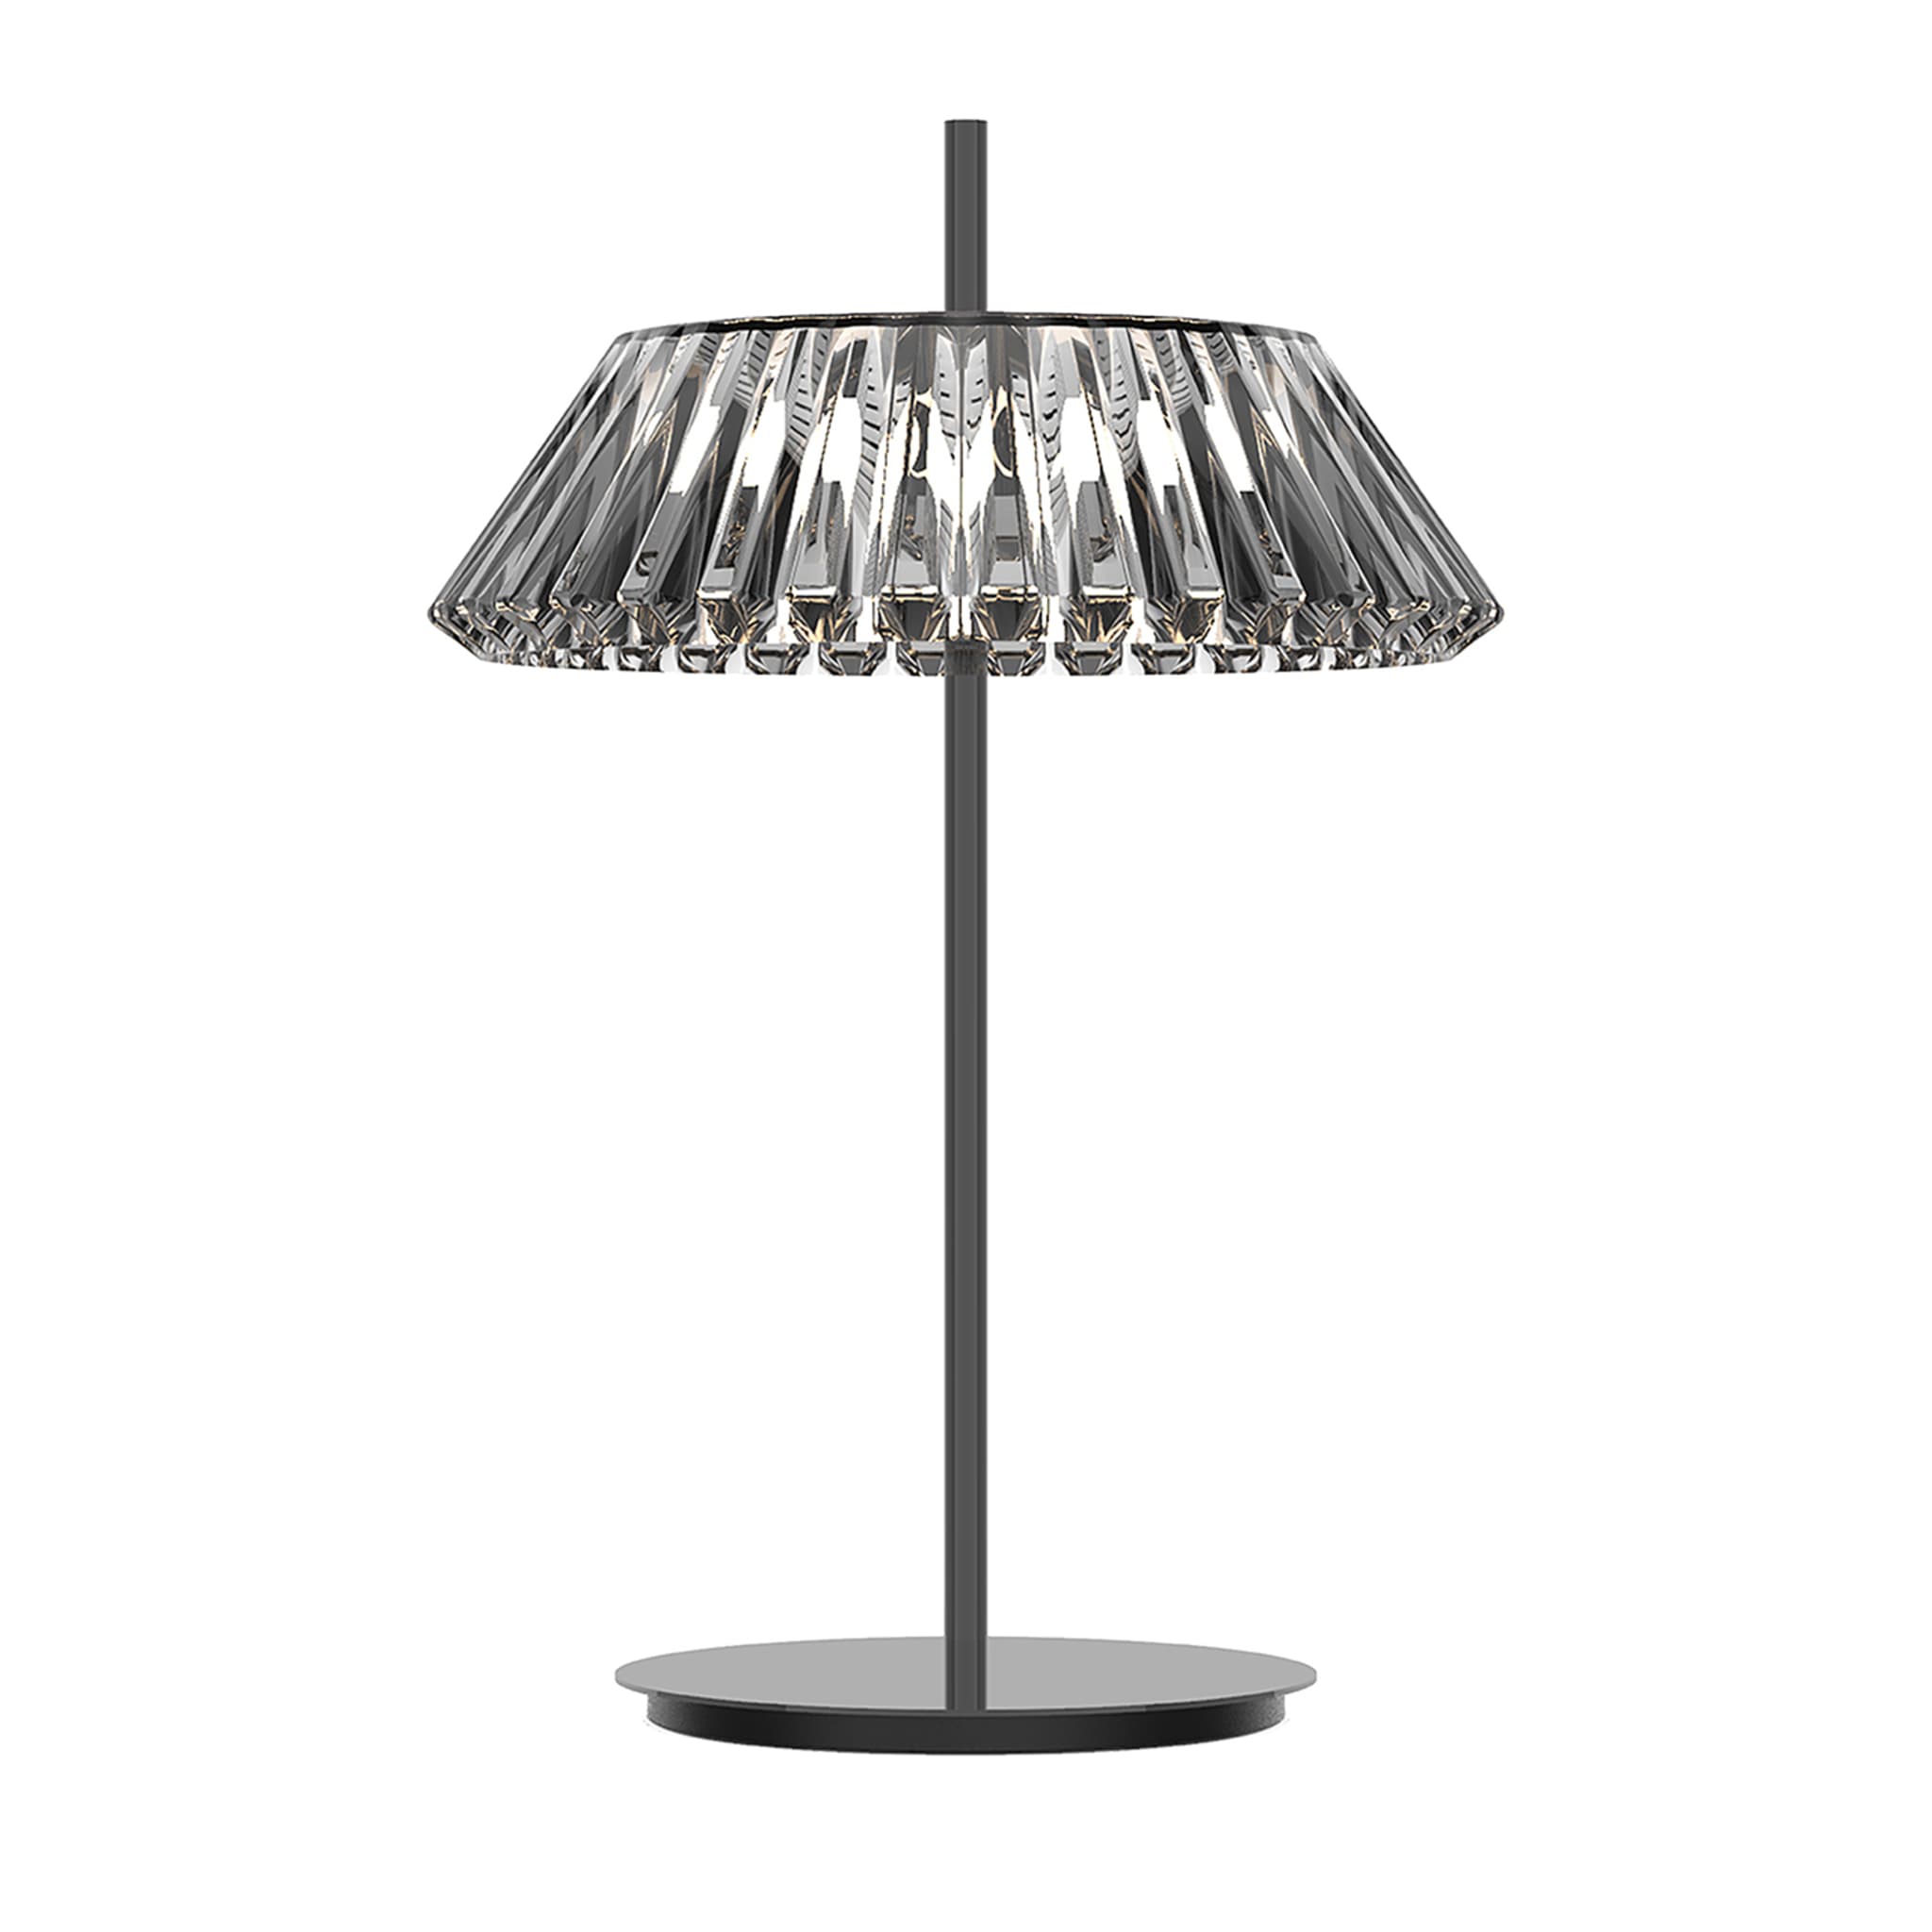 Chrome Nickel Table Lamp by MAM Design - Main view